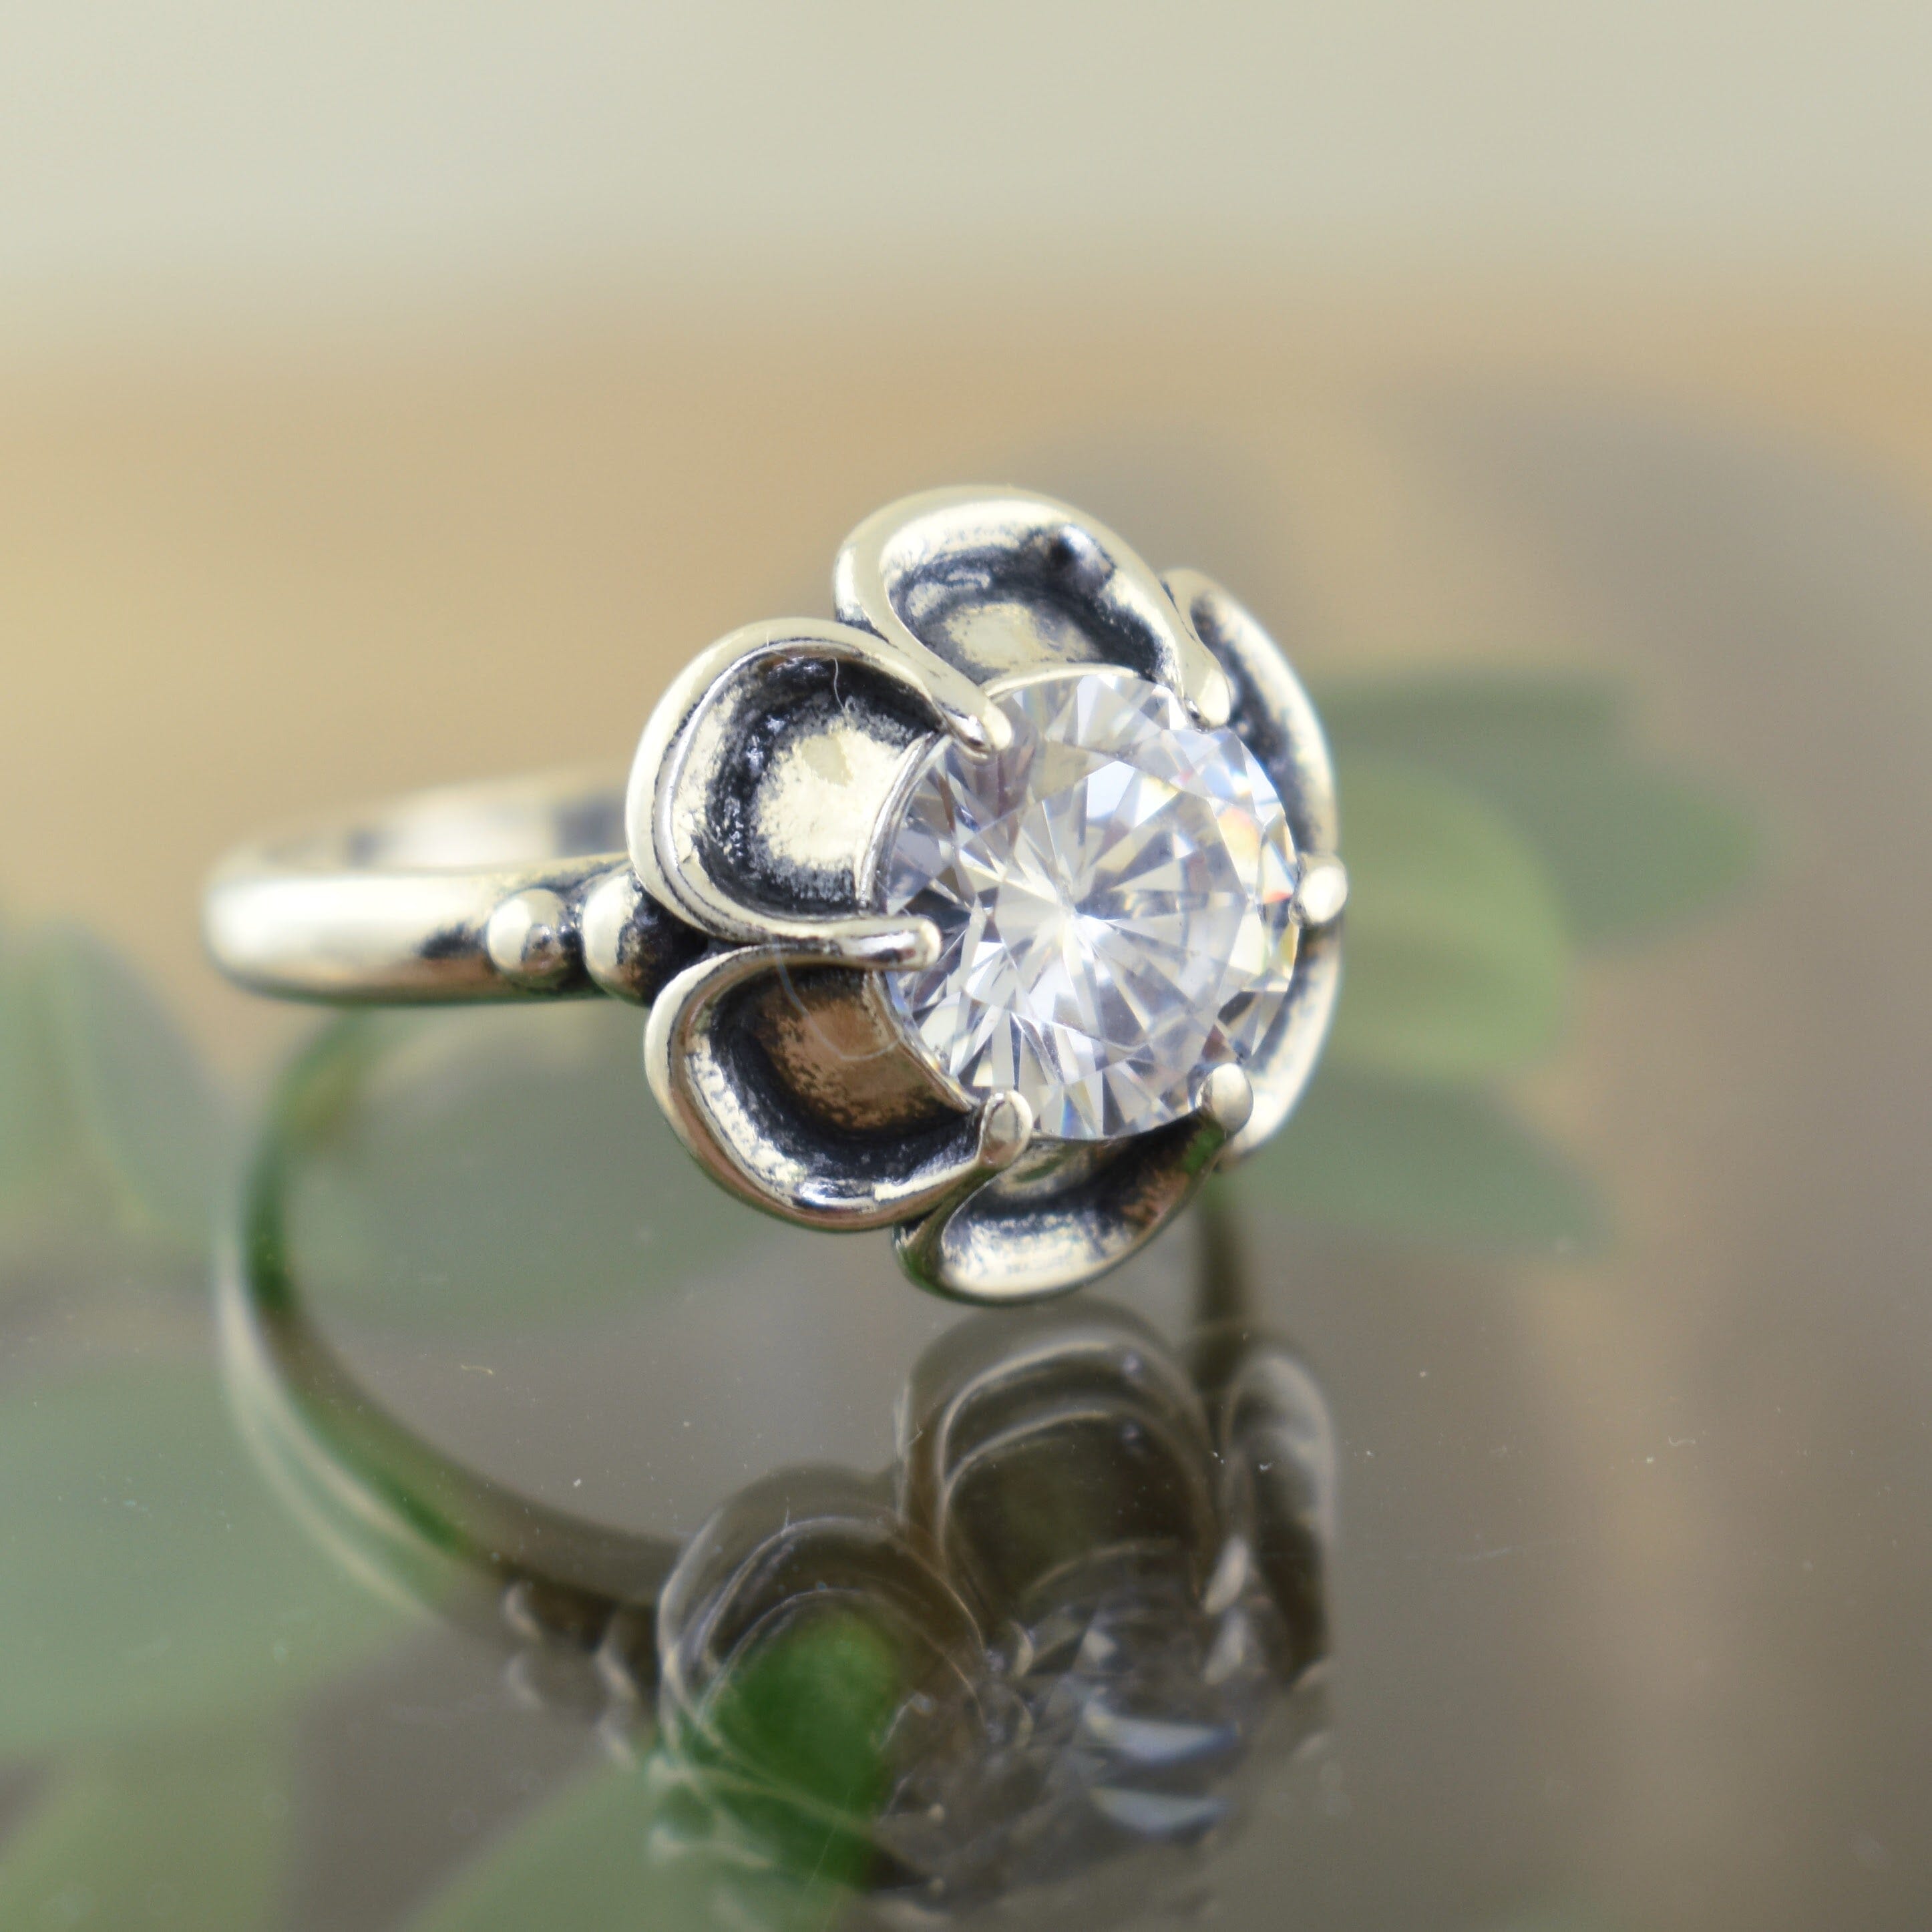 .925 sterling silver flower ring with clear cubic zirconia center stone